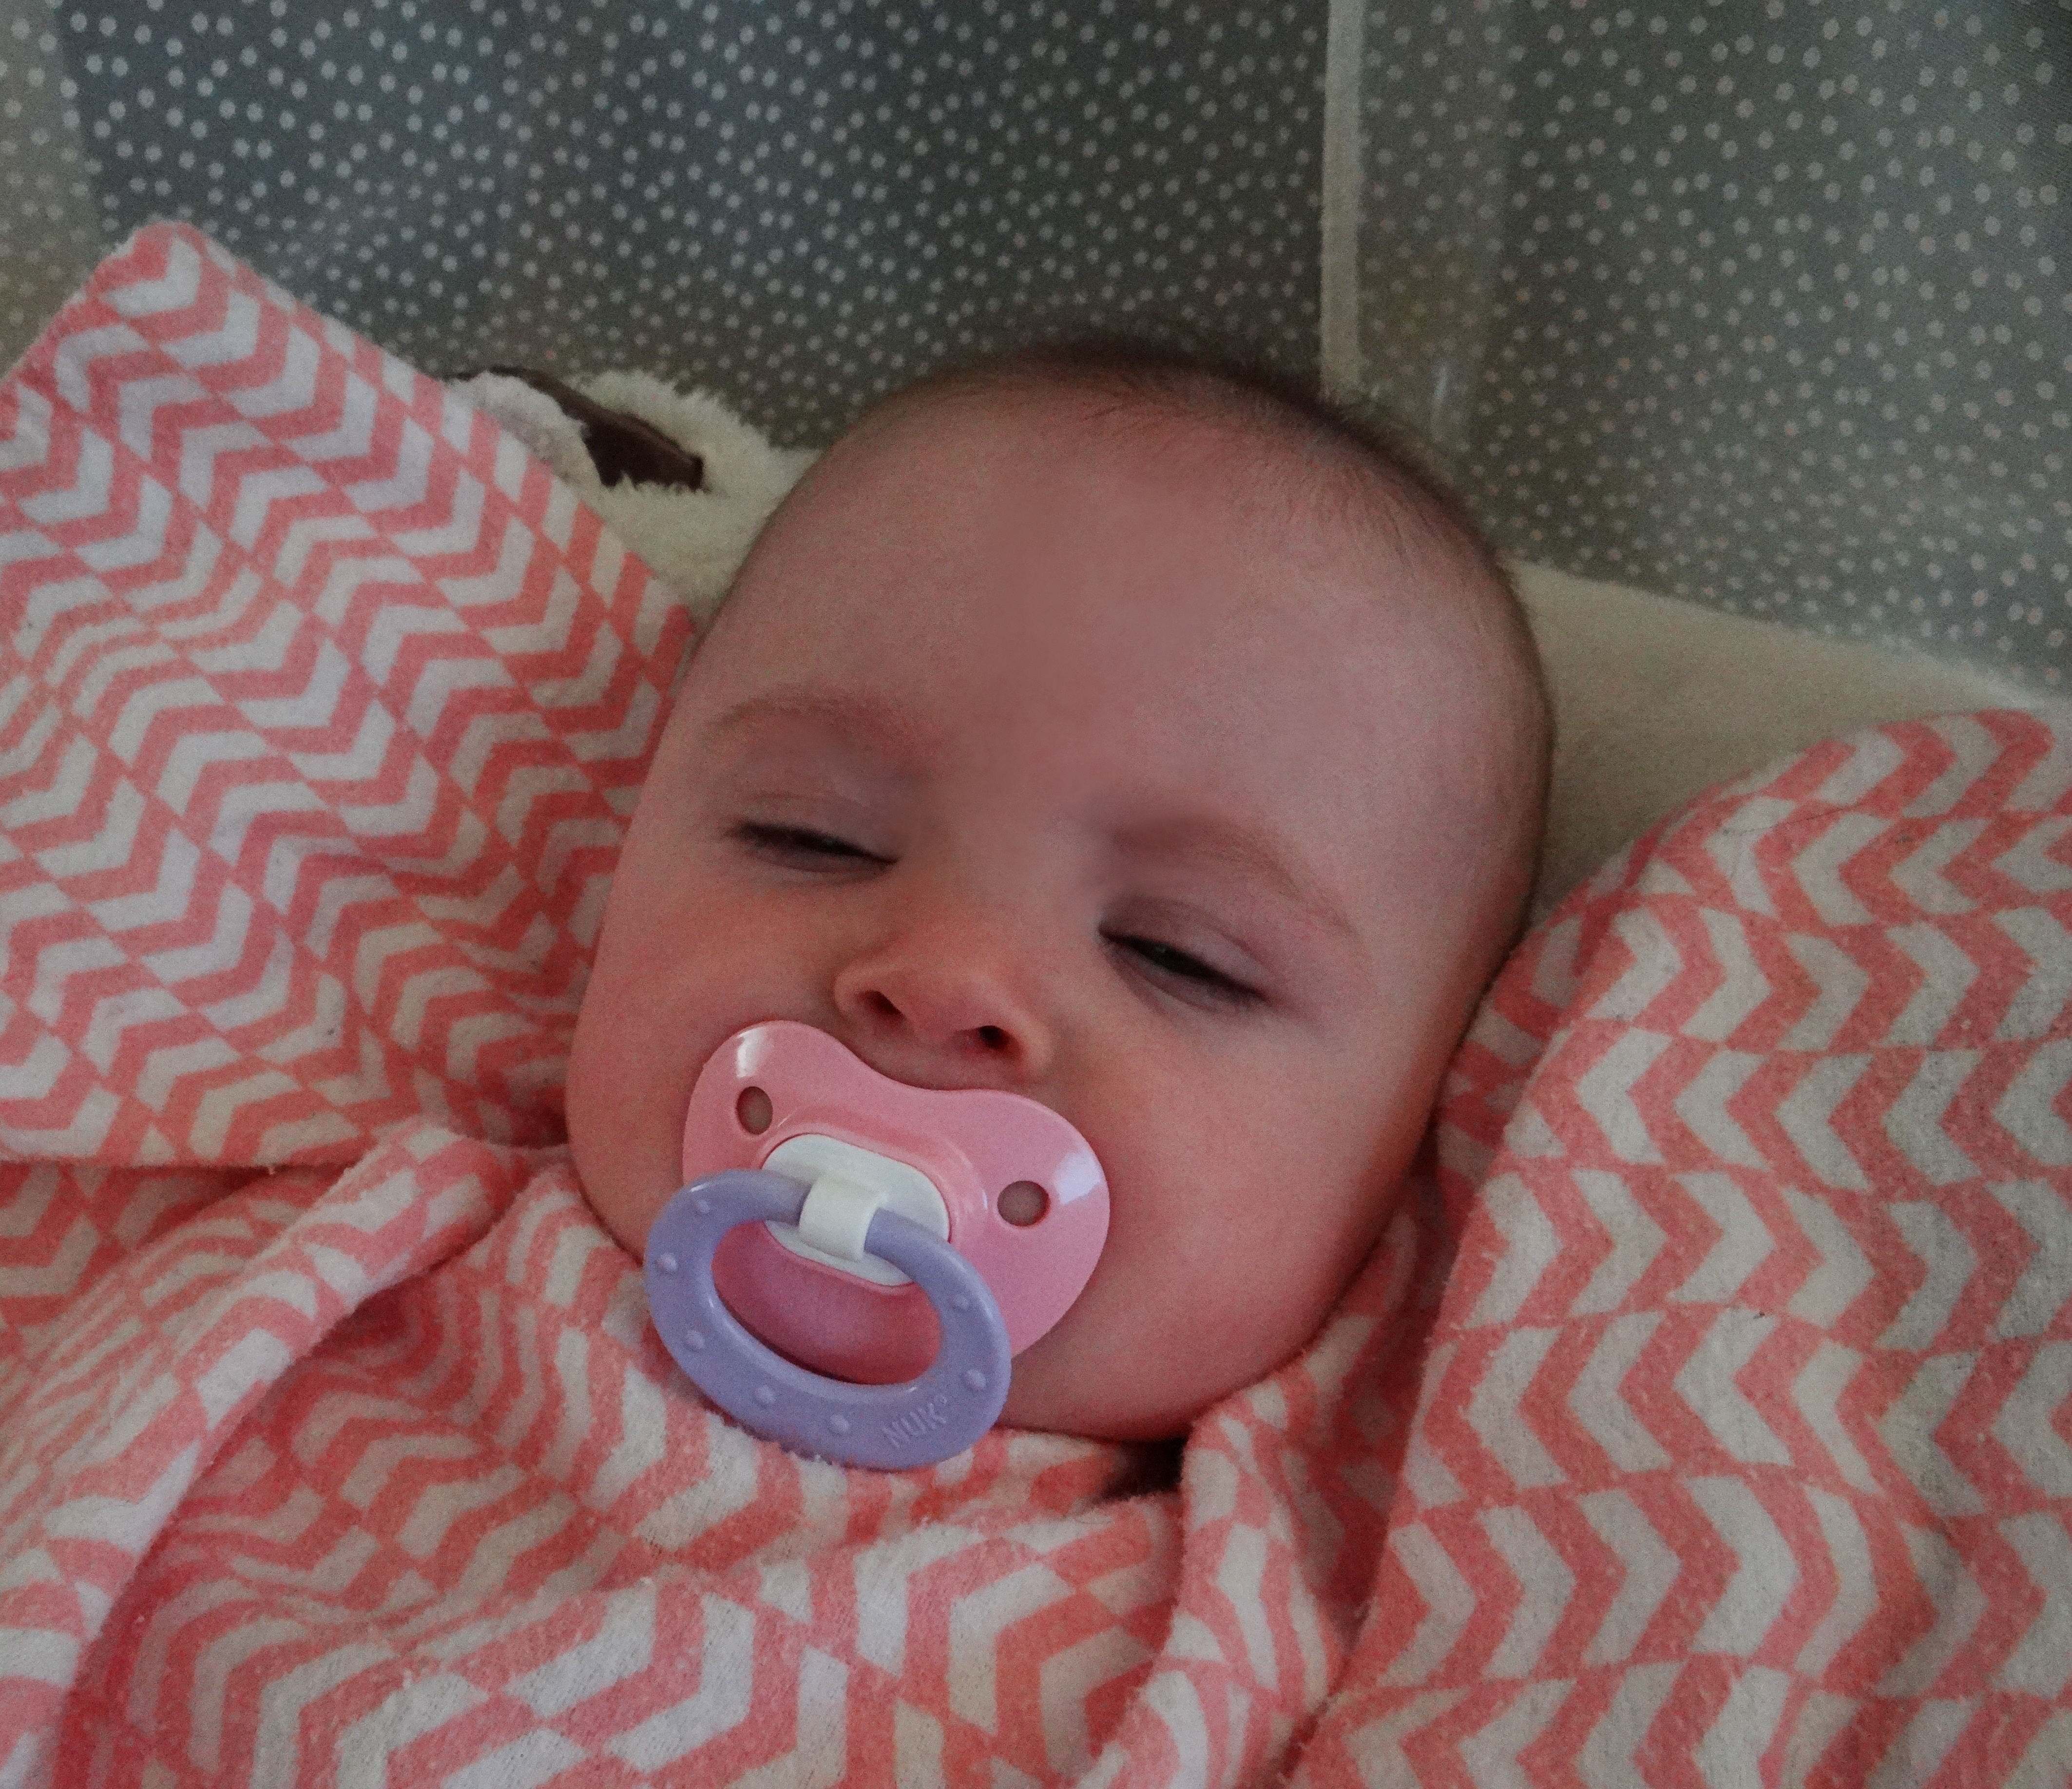 Baby having a nap with a pacifier